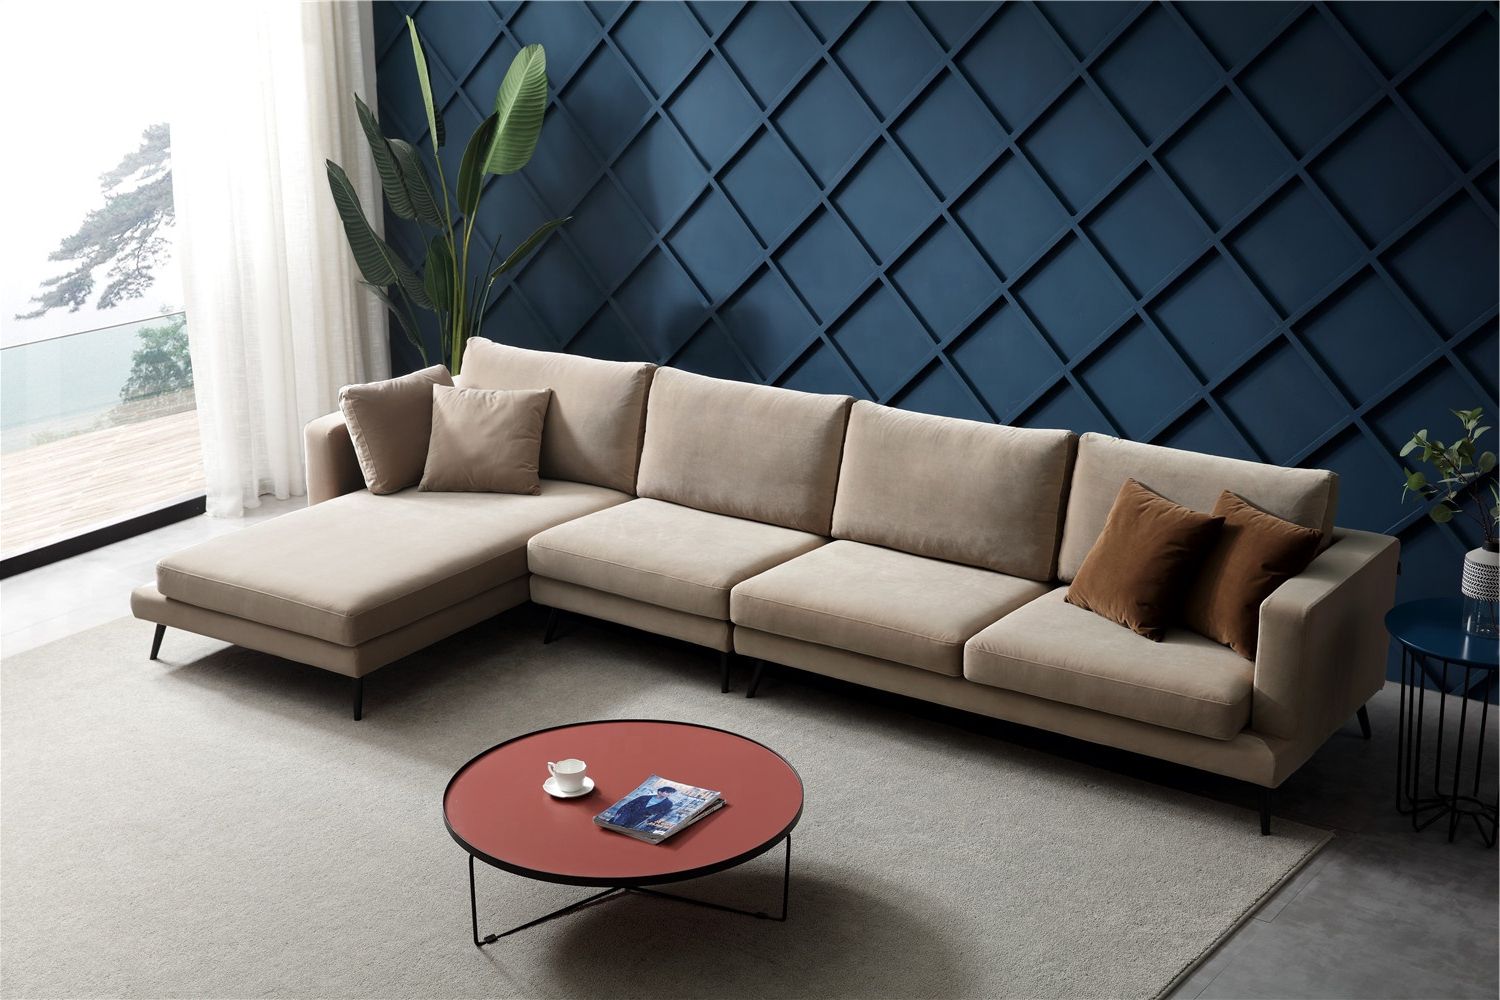 Source Dark Beige Custom Upholstered Modern 4 Seater L Shaped Sectional Fabric  Sofa On M.alibaba Regarding Modern L Shaped Fabric Upholstered Couches (Gallery 13 of 20)